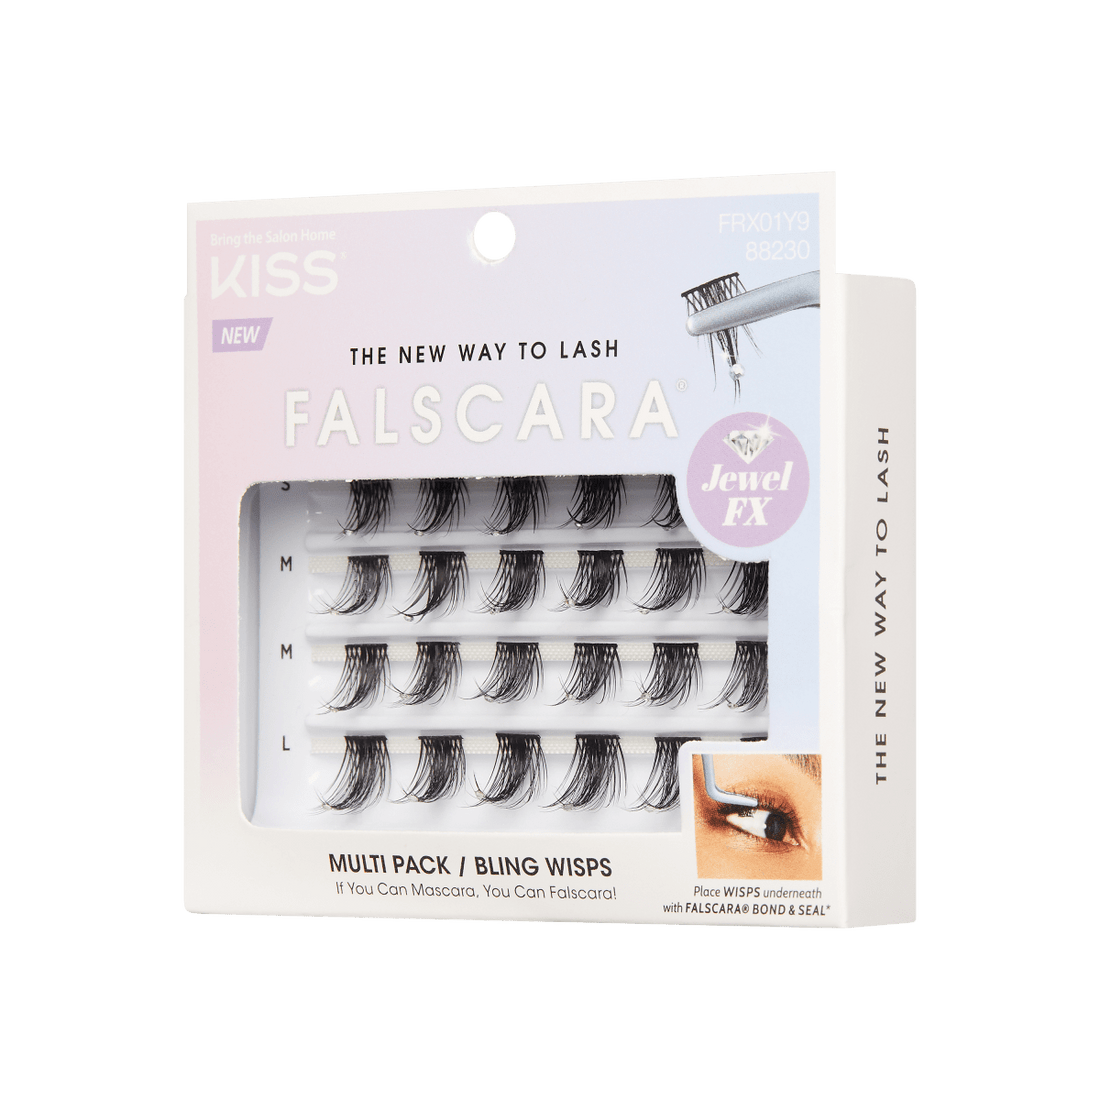 Package of Falscara lash wisps. This pack includes 24 lash wisps that apply under the lash line for an eyelash extension look. 